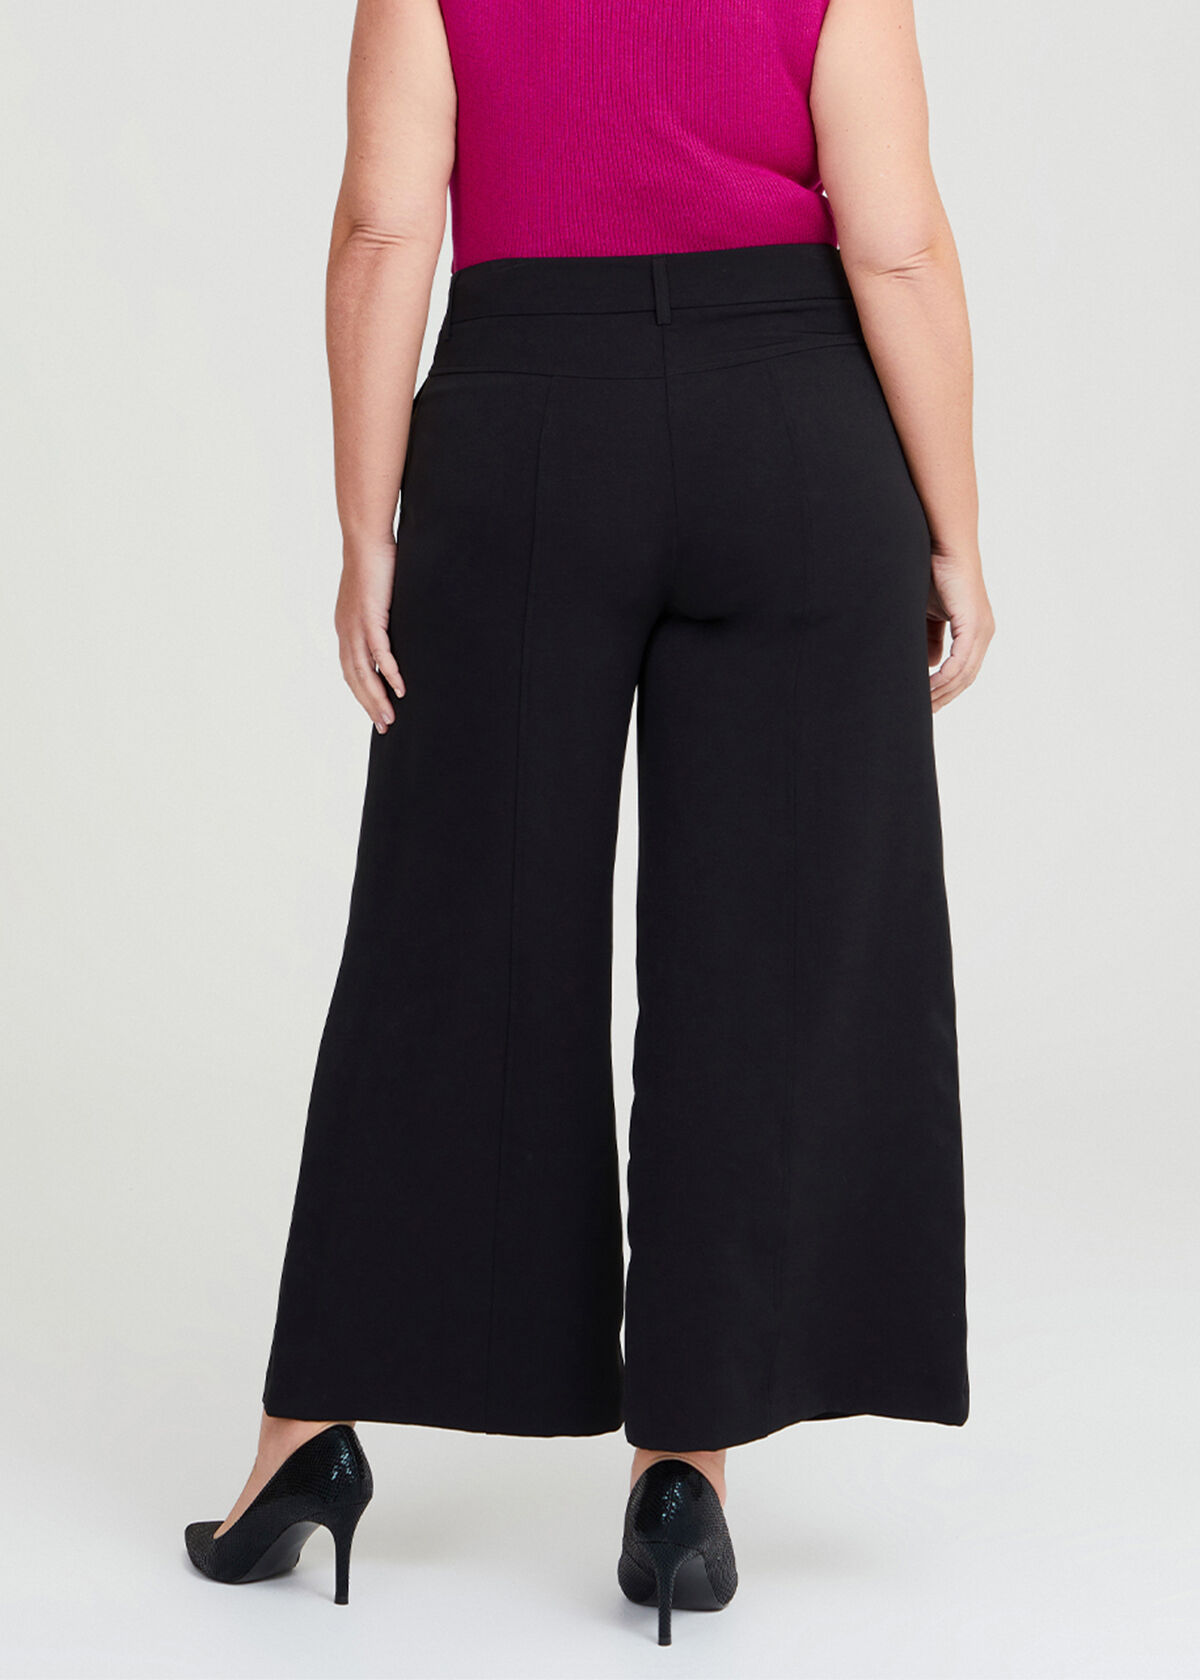 Shop Plus Size Pin Tuck Trousers in Black | Sizes 12-30 | Taking